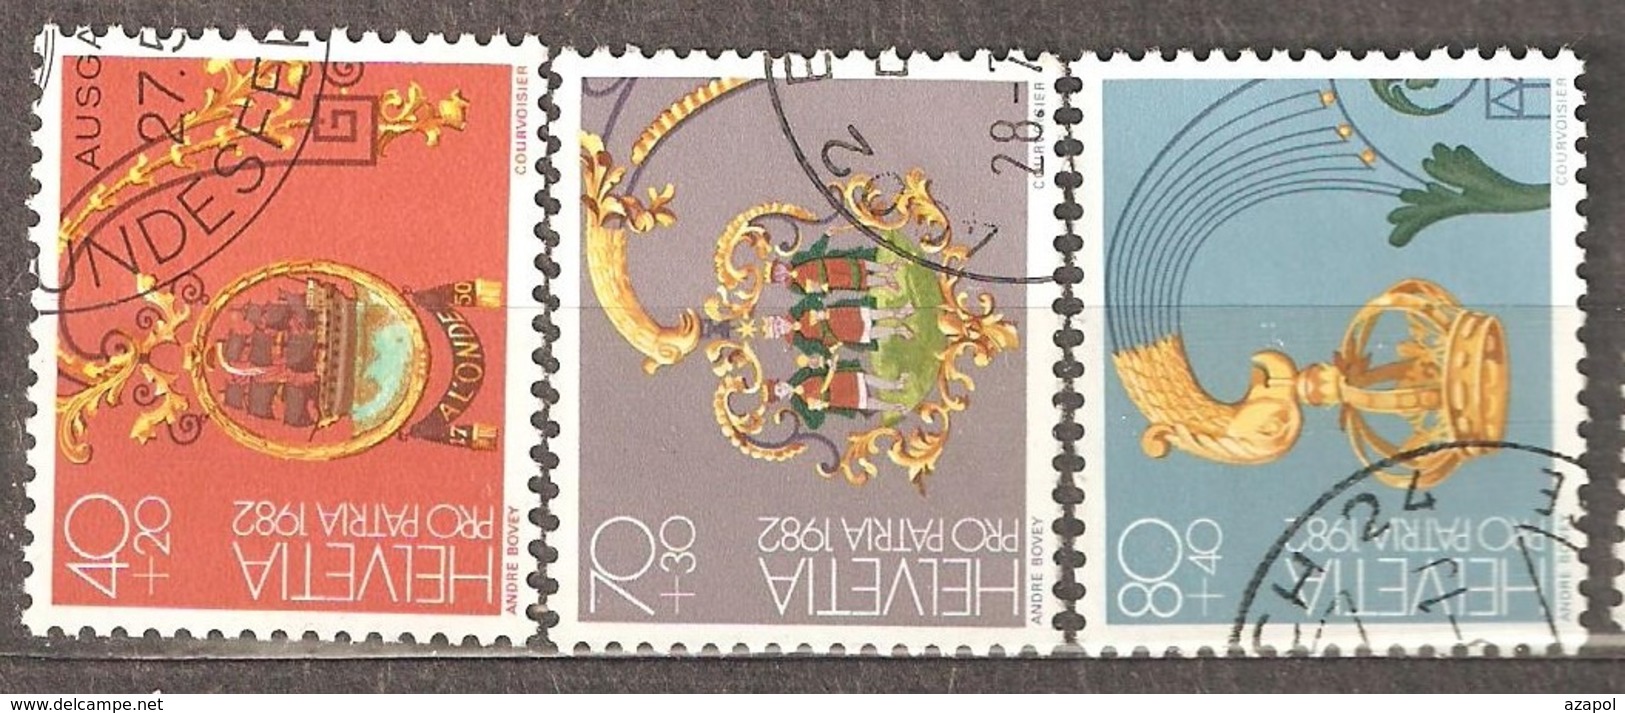 Switzerland: Pro Patria, 3 Used Stamps From A Set, Tavern Signs, 1981, Mi#1224-1226 - Oblitérés